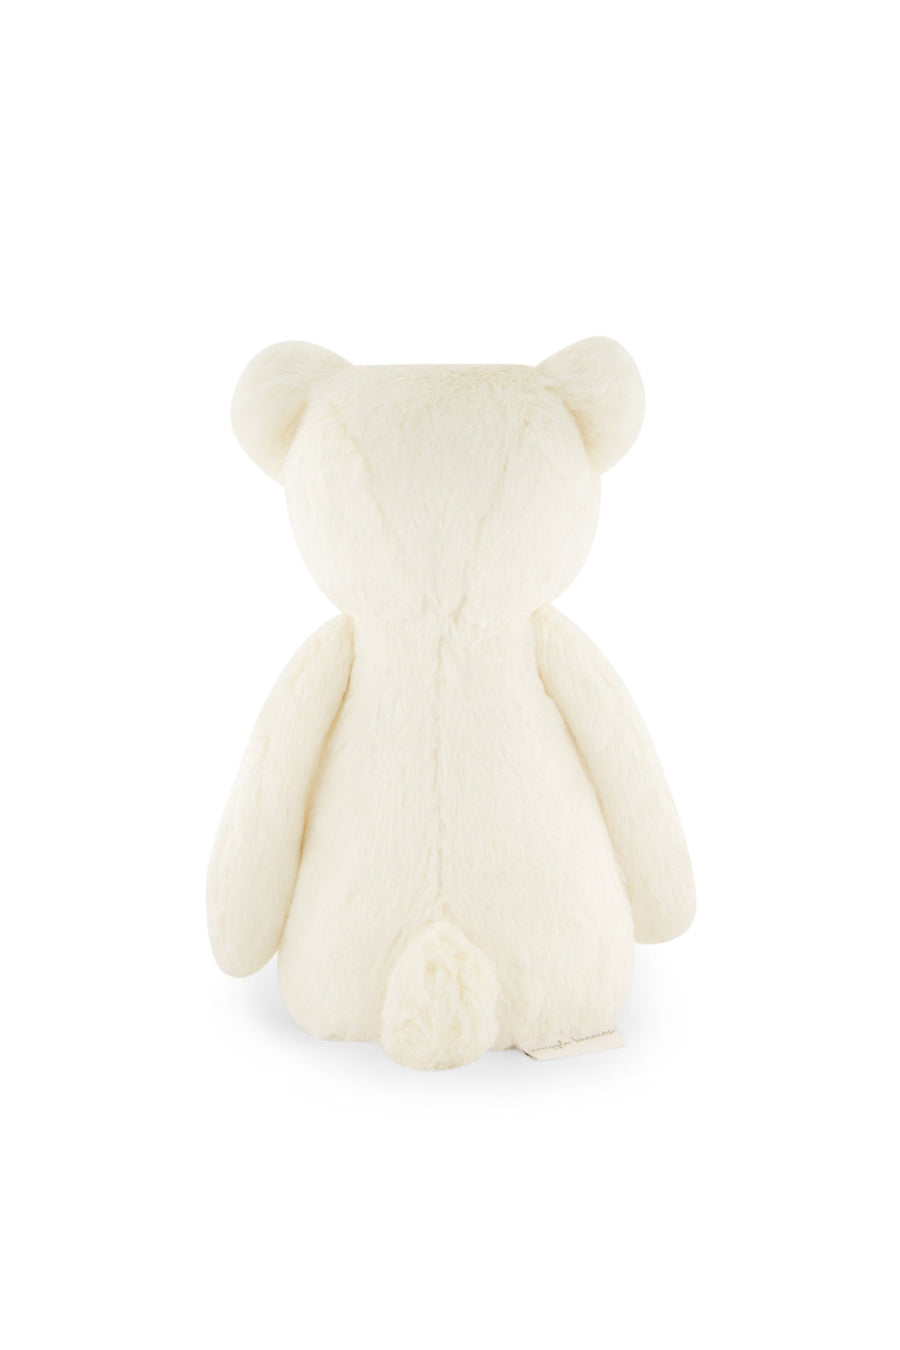 Snuggle Bunnies - George the Bear - Marshmallow Childrens Toy from Jamie Kay NZ